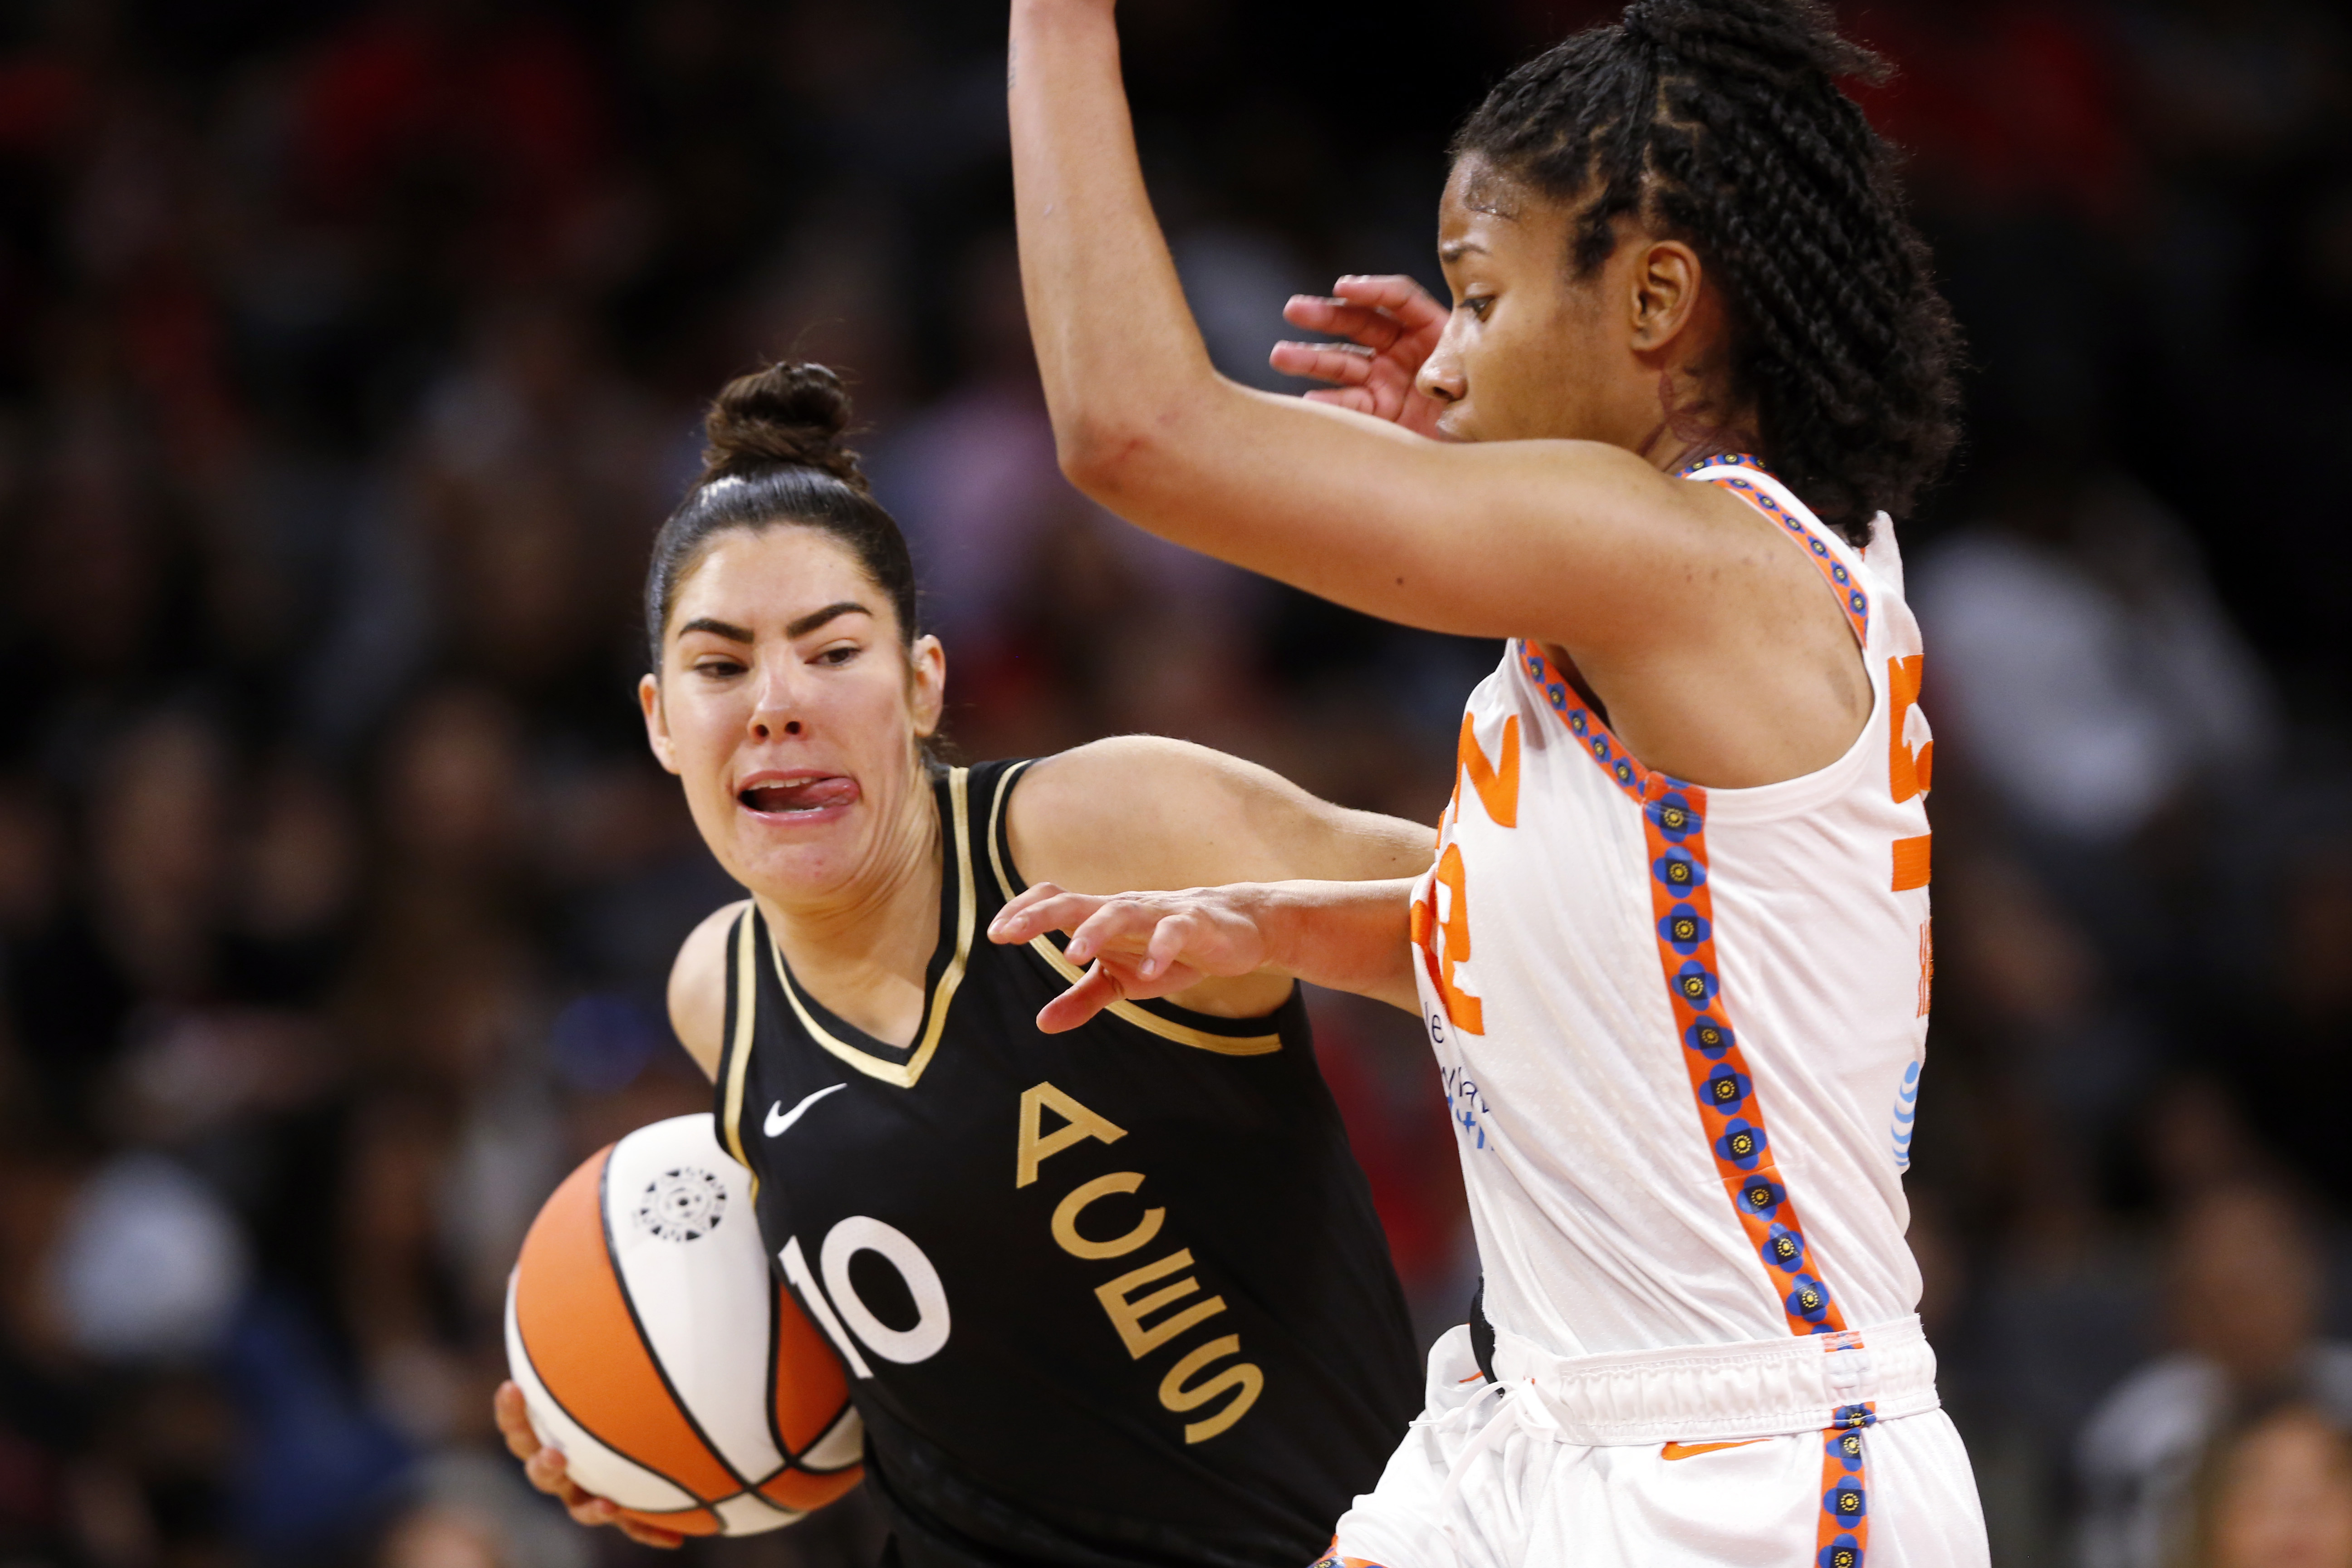 Las Vegas Aces - “Just to play alongside [Candace Parker] would be